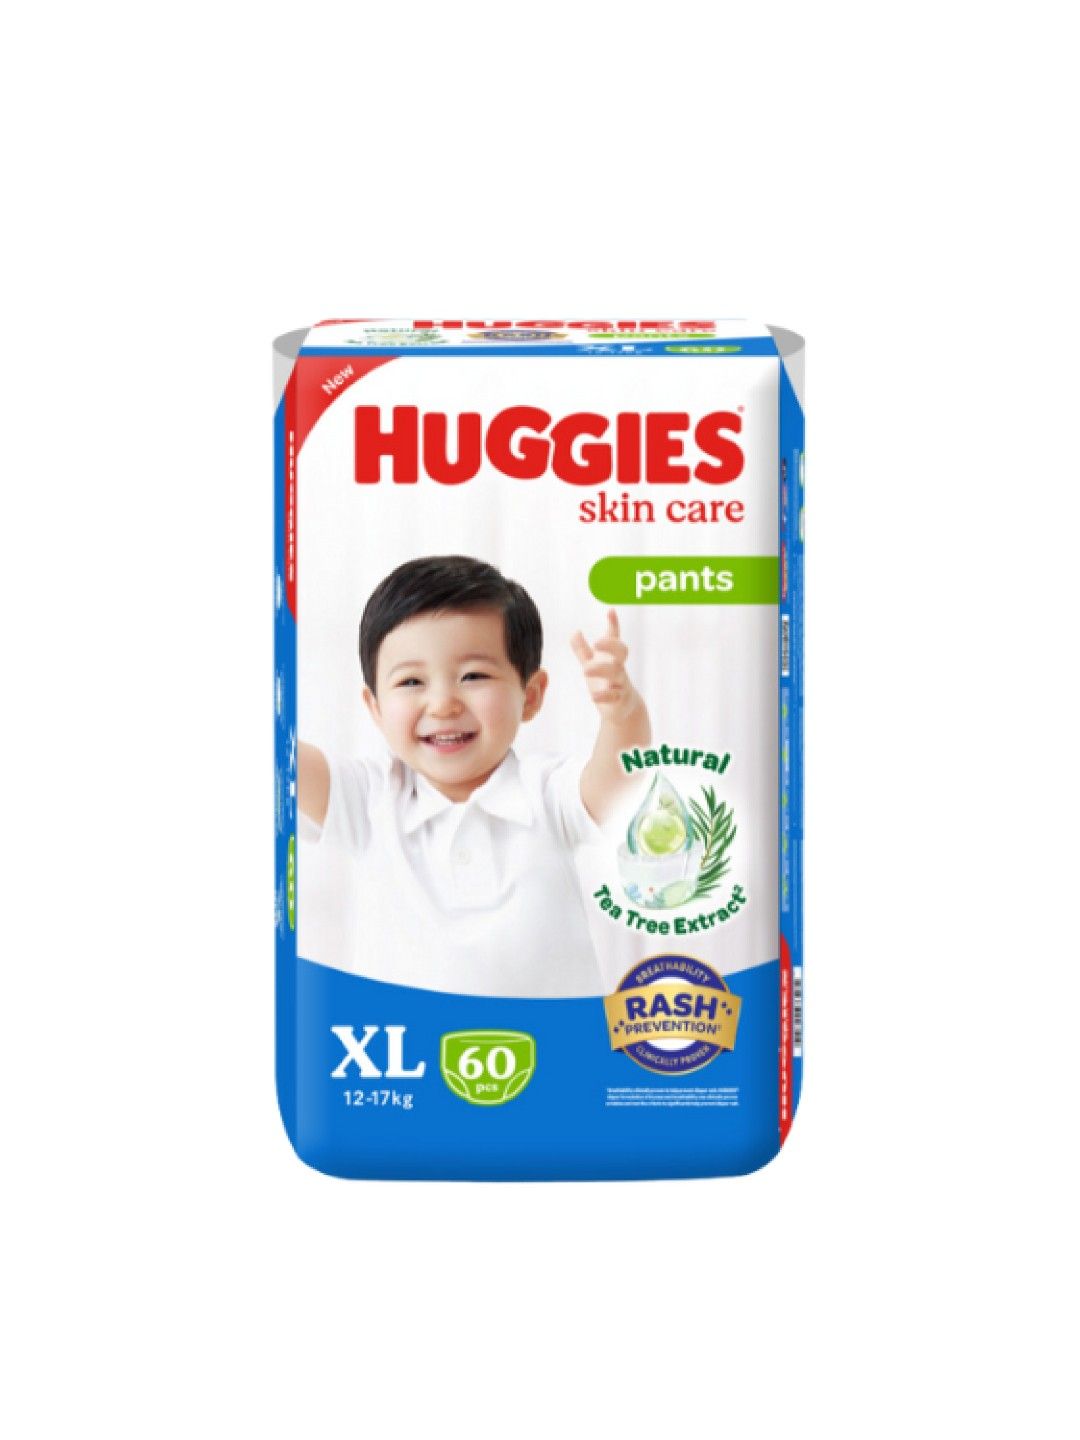 Huggies Wonder Pants, Extra Large (XL) Size Diapers, 28 Count - indeals.in  | Huggies, Baby, Toy chest